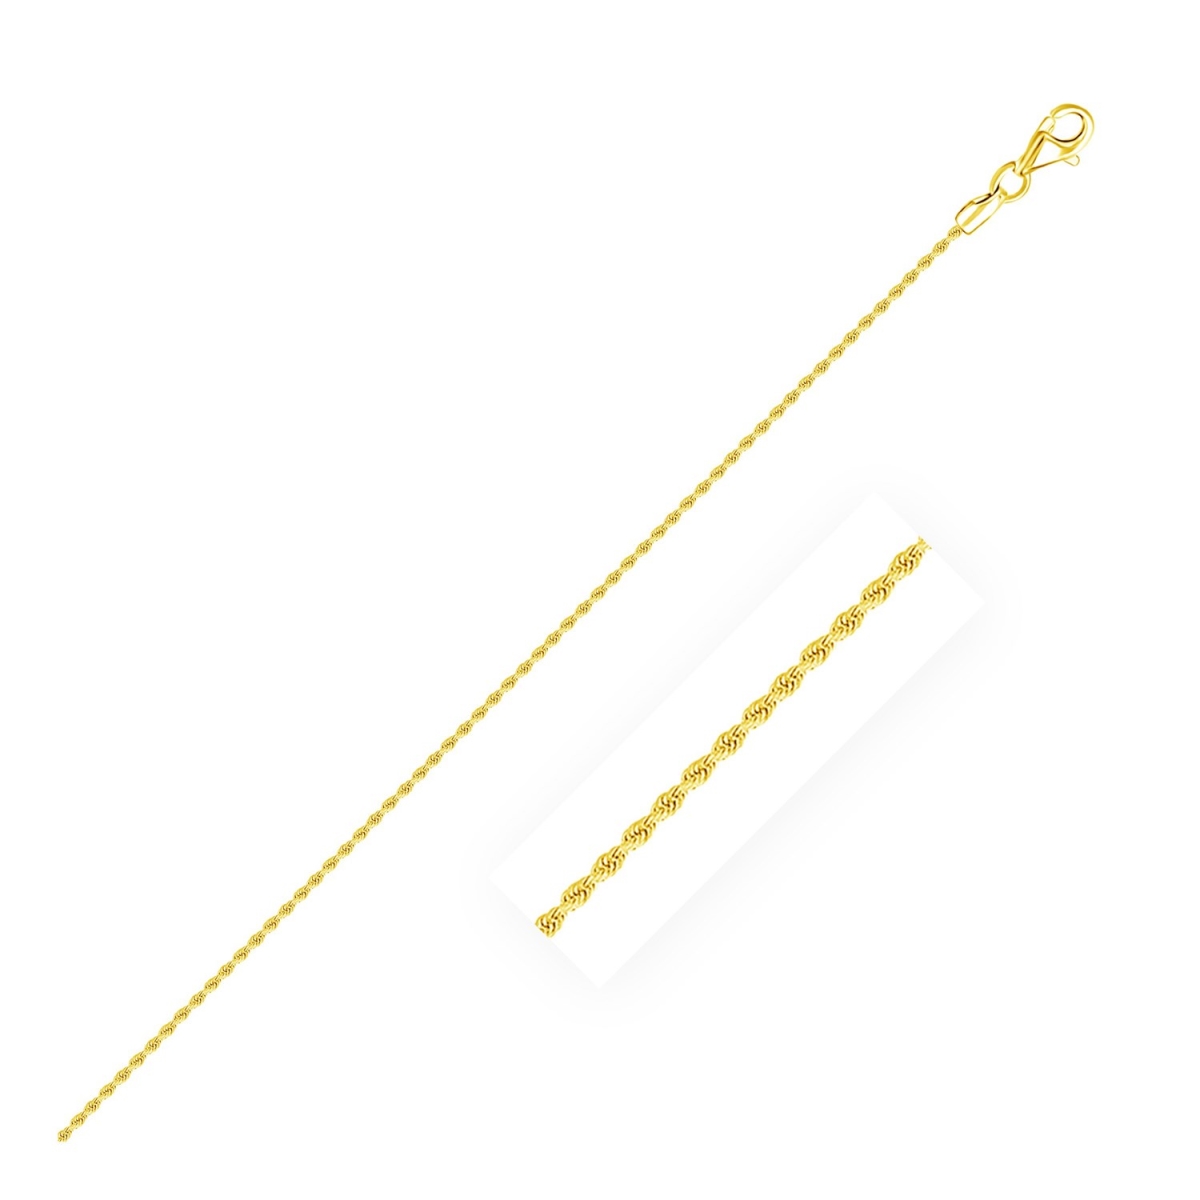 D8686746-24 10k Yellow Gold Solid Diamond Cut Rope Chain, 1.25 Mm - Size 24 In.